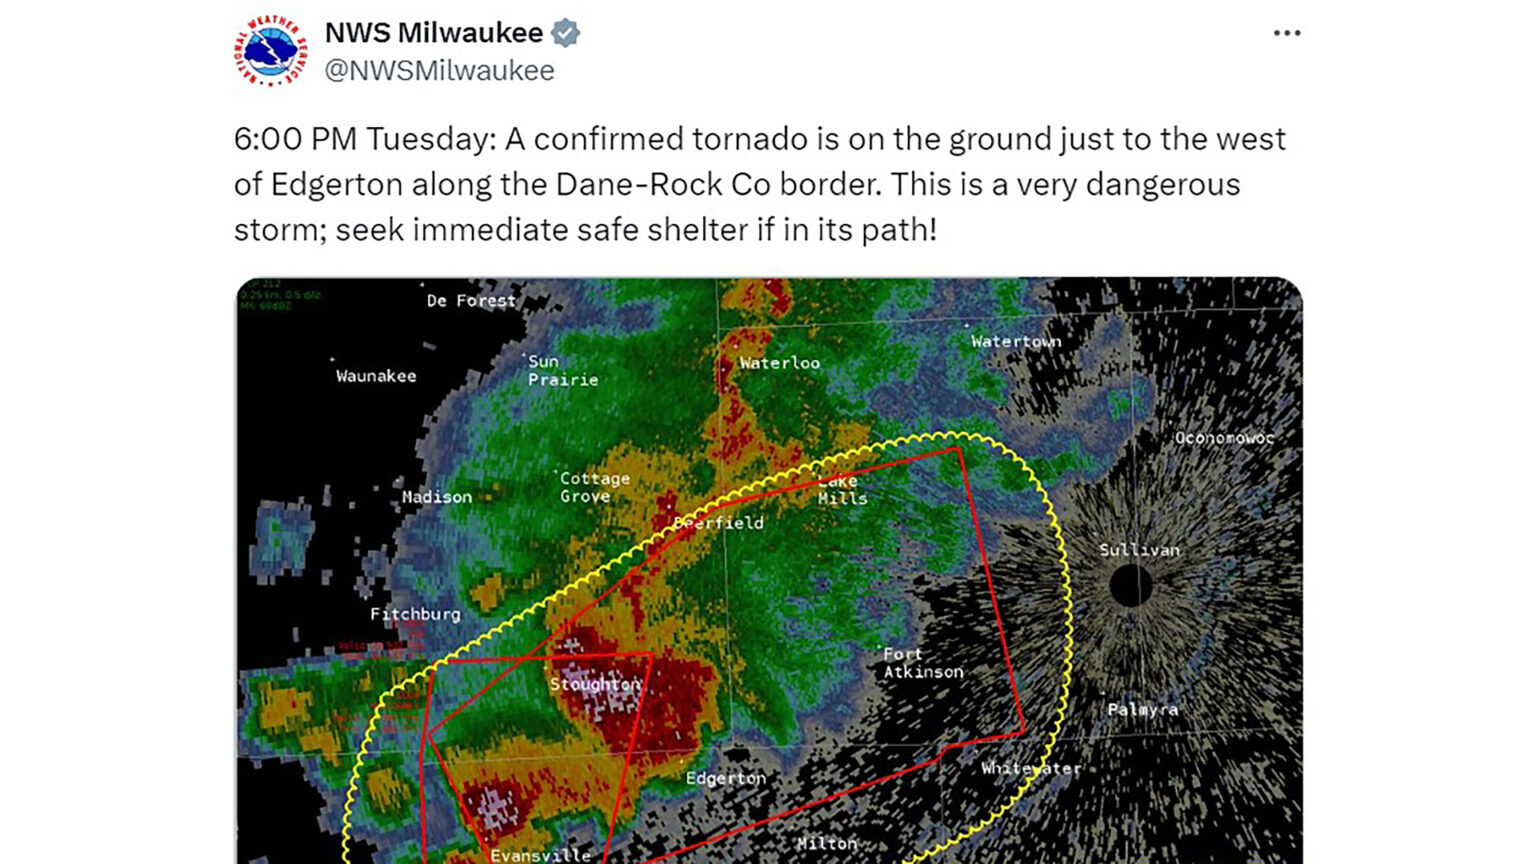 A screenshot of an X post from the account @NWSMilwaukee and with a profile image showing the logo of the National Weather Service shows a radar image of precipitation with different lines marking the projected path of an observed tornado, with text reading: 6:00 PM Tuesday: A confirmed tornado is on the ground just to the west of Edgerton along the Dane-Rock Co border. This is a very dangerous storm; seek immediate safe shelter if in its path!